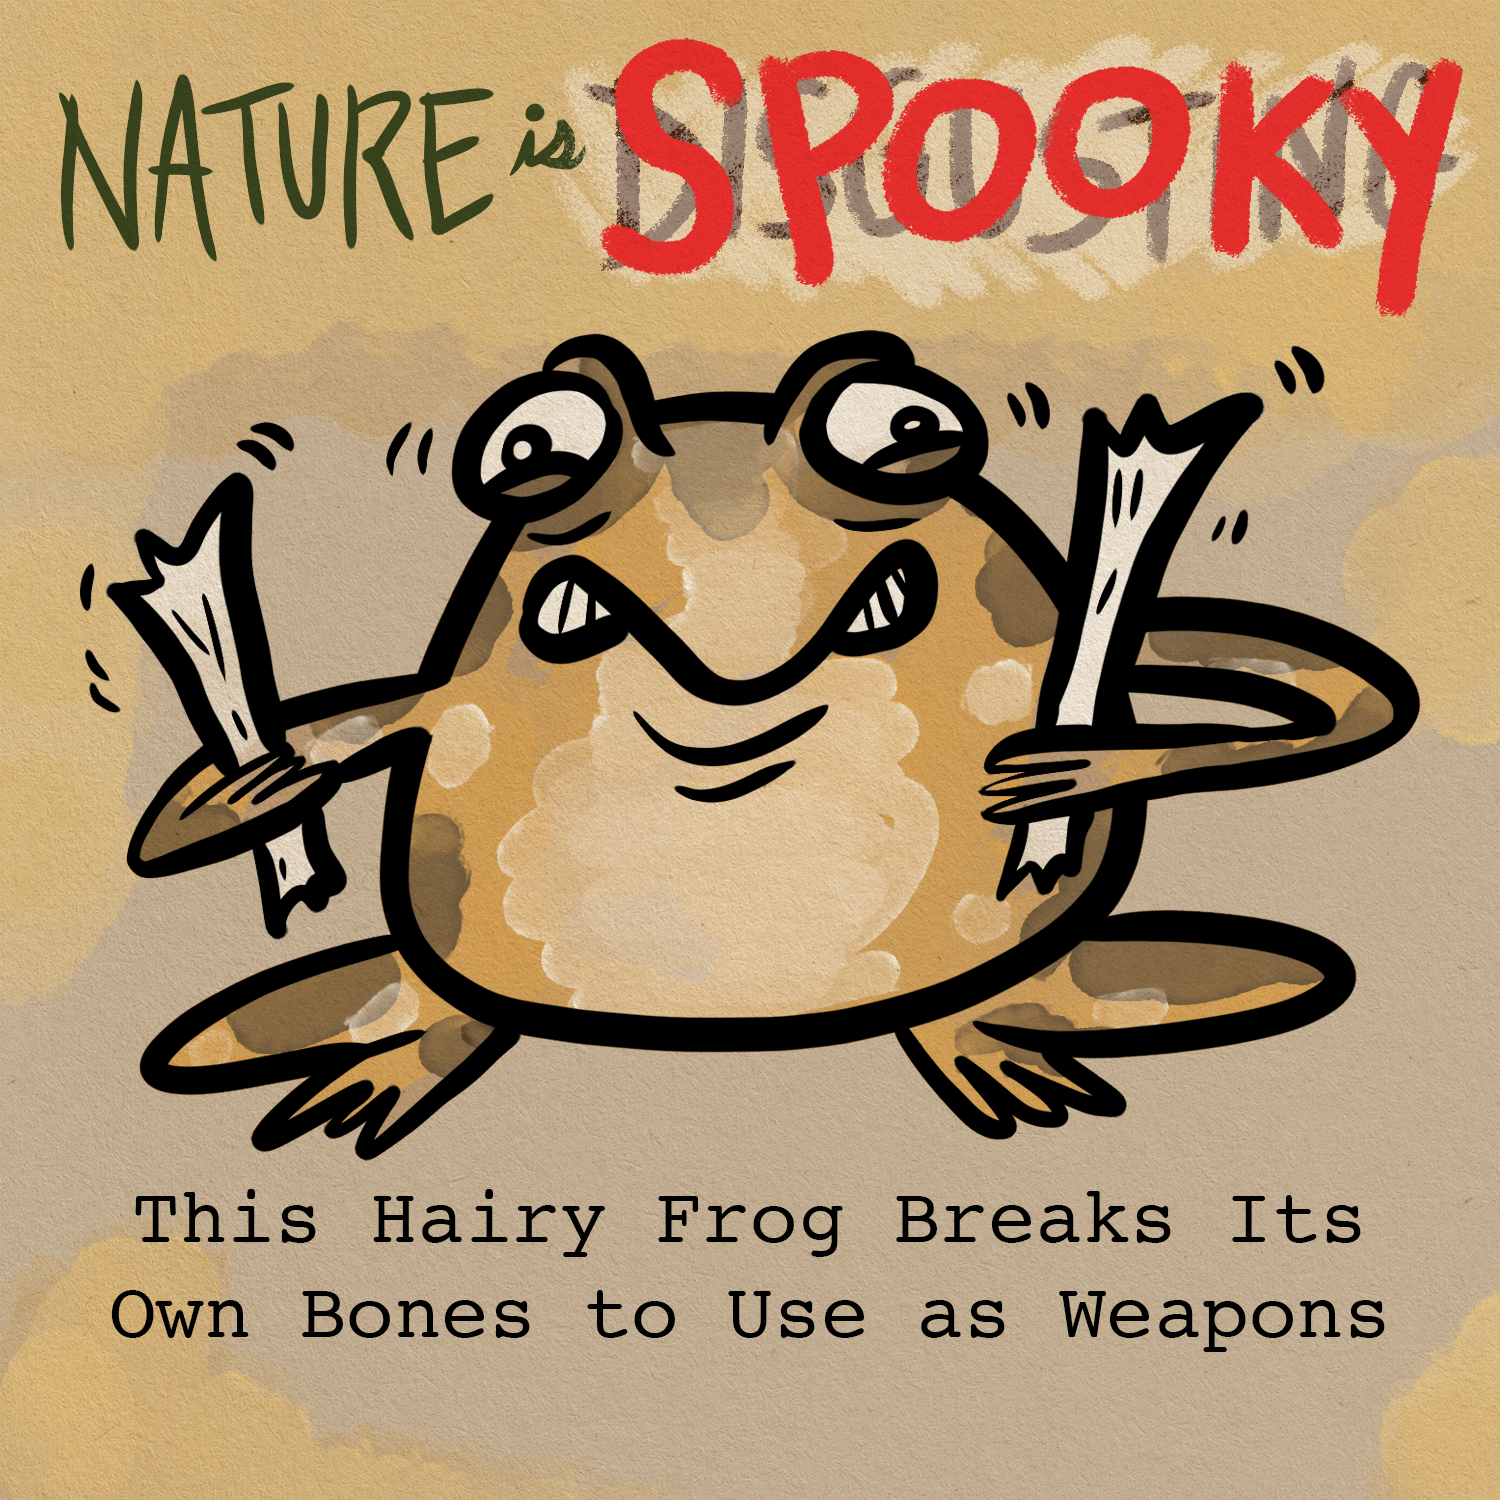 Nature is Spooky: This Frog Breaks Its Own Bones to Use as Weapons